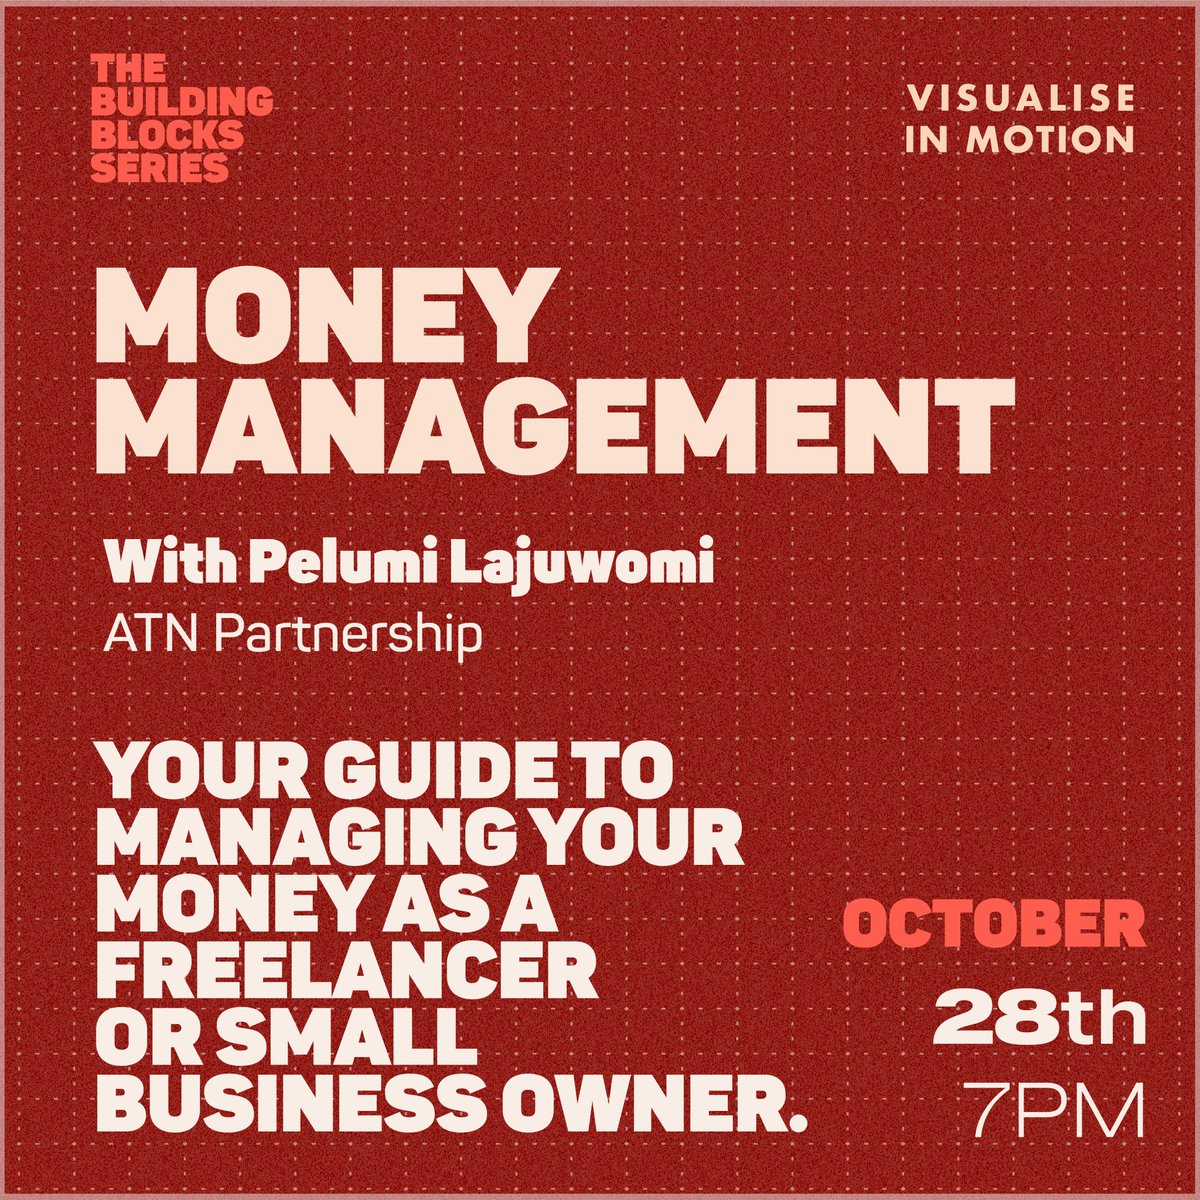 The second event is on October 28th @ 7pm and it's all about managing your money as a freelancer or first time entrepreneur. Let's keep your house in order and records in check! You can register for tickets here:  https://www.eventbrite.co.uk/e/122266505409 